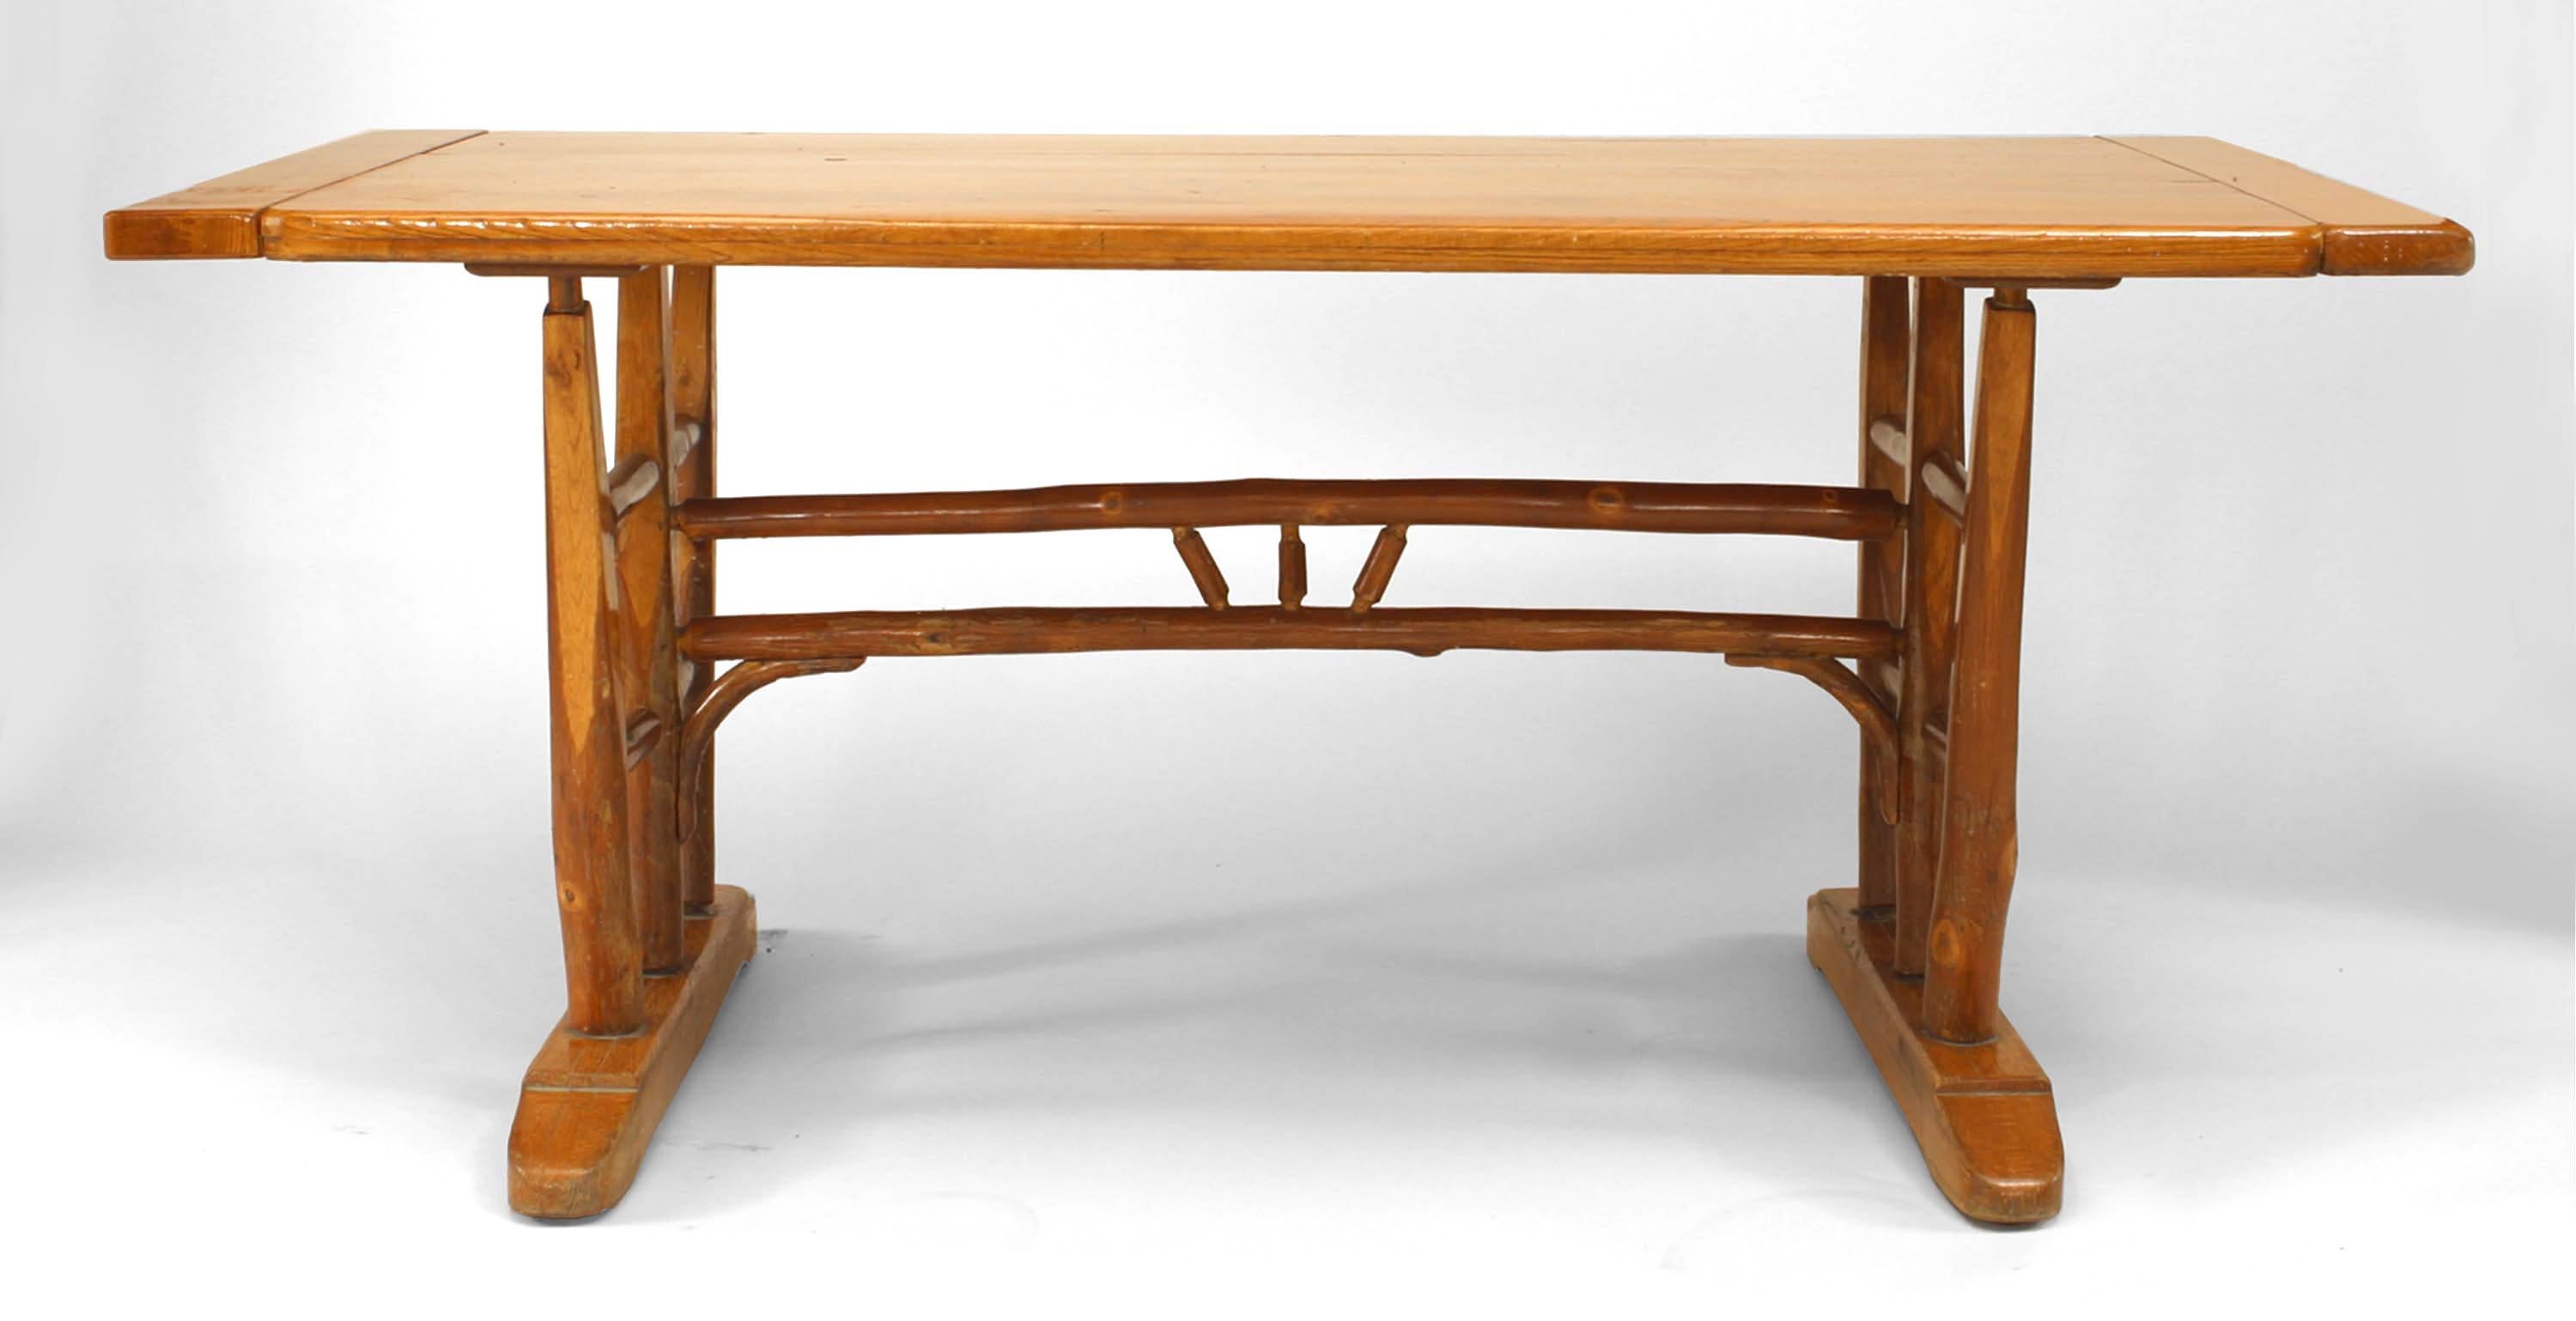 Rustic Old Hickory (1940s) dining table with rectangular top on trestle supports joined by a spindle stretcher (Branded: Old Hickory; Martinsville, Indiana) (Related item: 059634)
